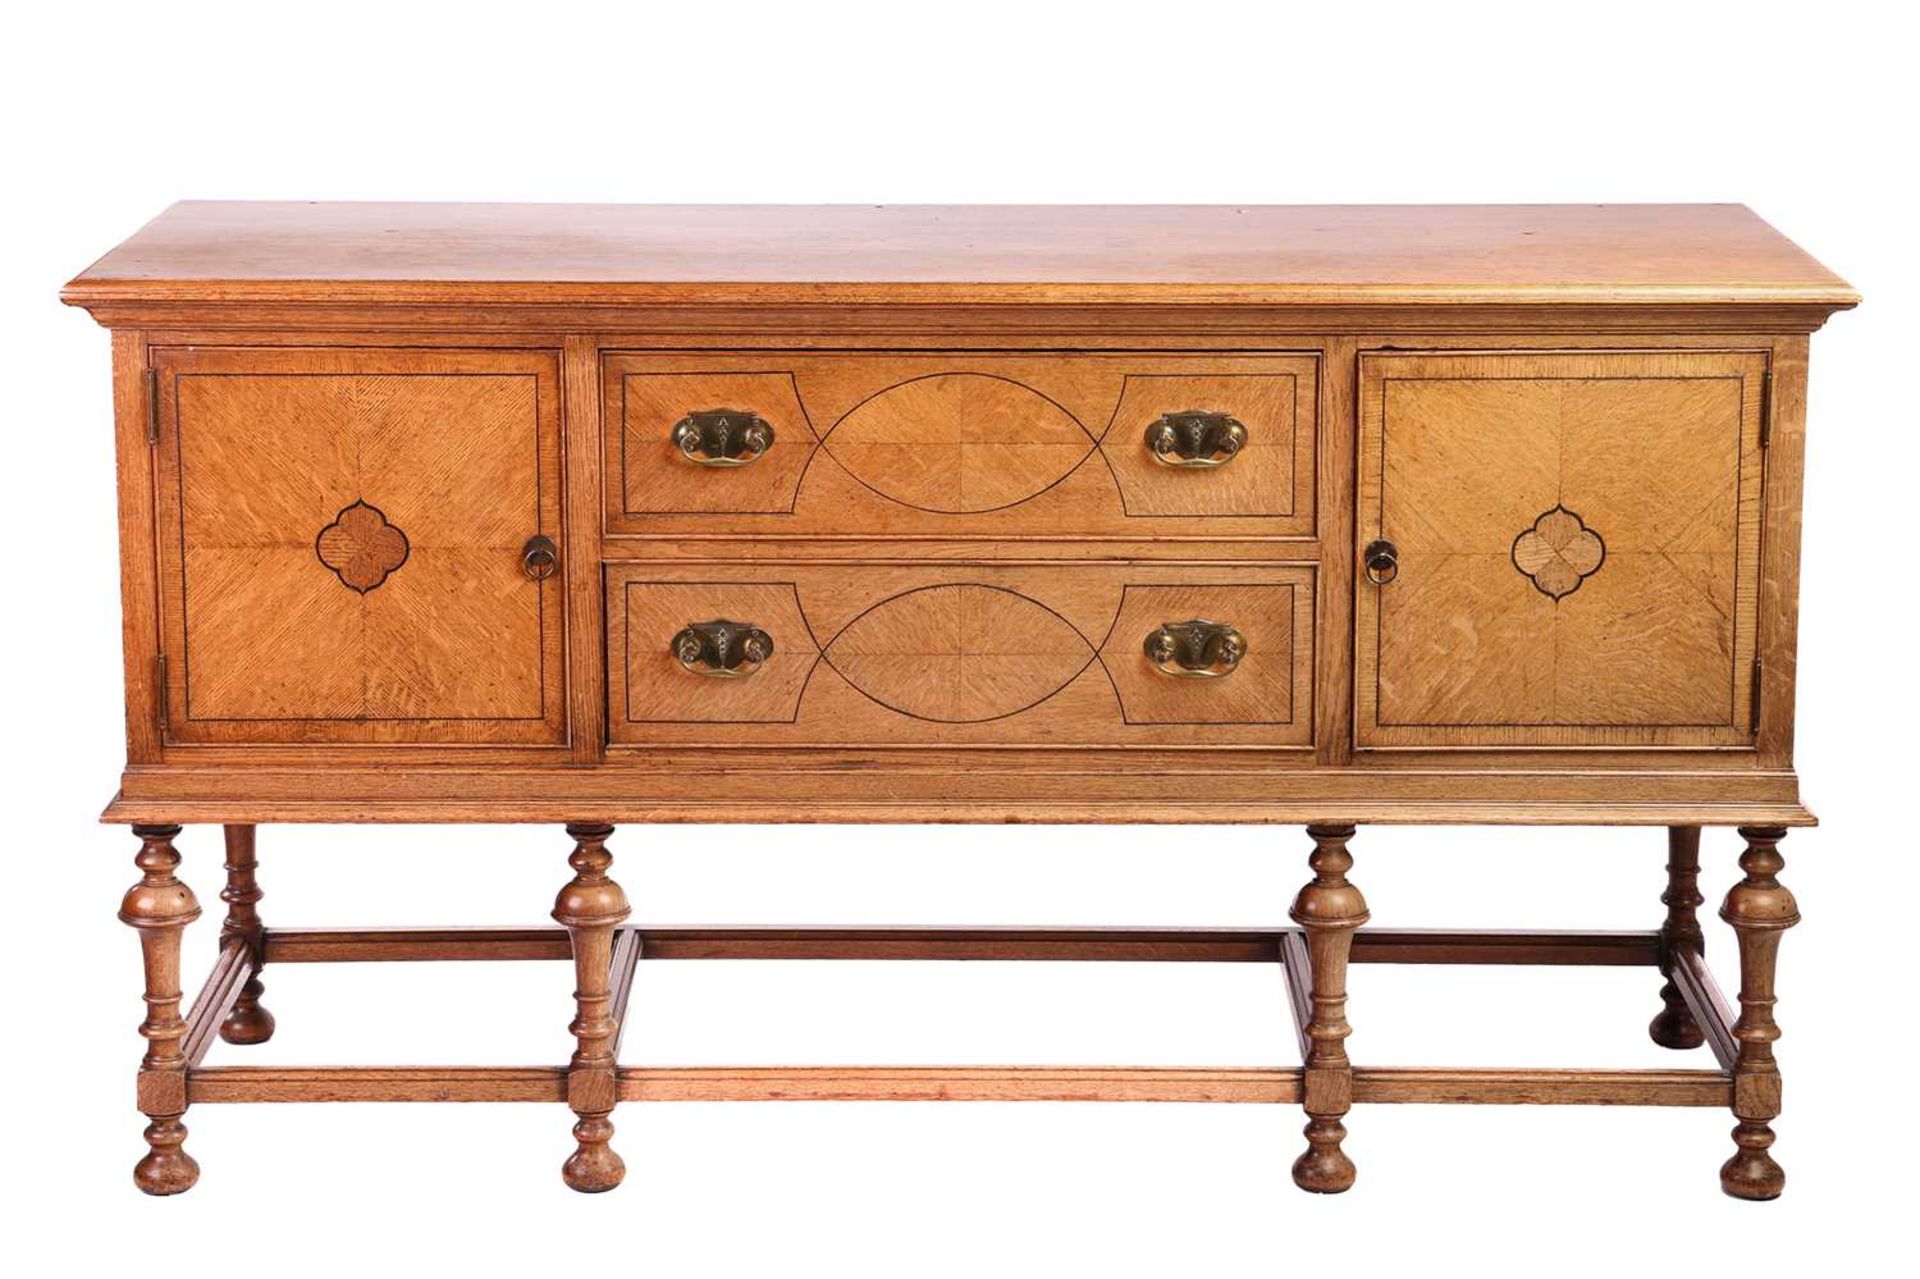 A Morgan and Co. arts and crafts oak sideboard with strung detail to the doors, raised on turned tru - Image 3 of 6